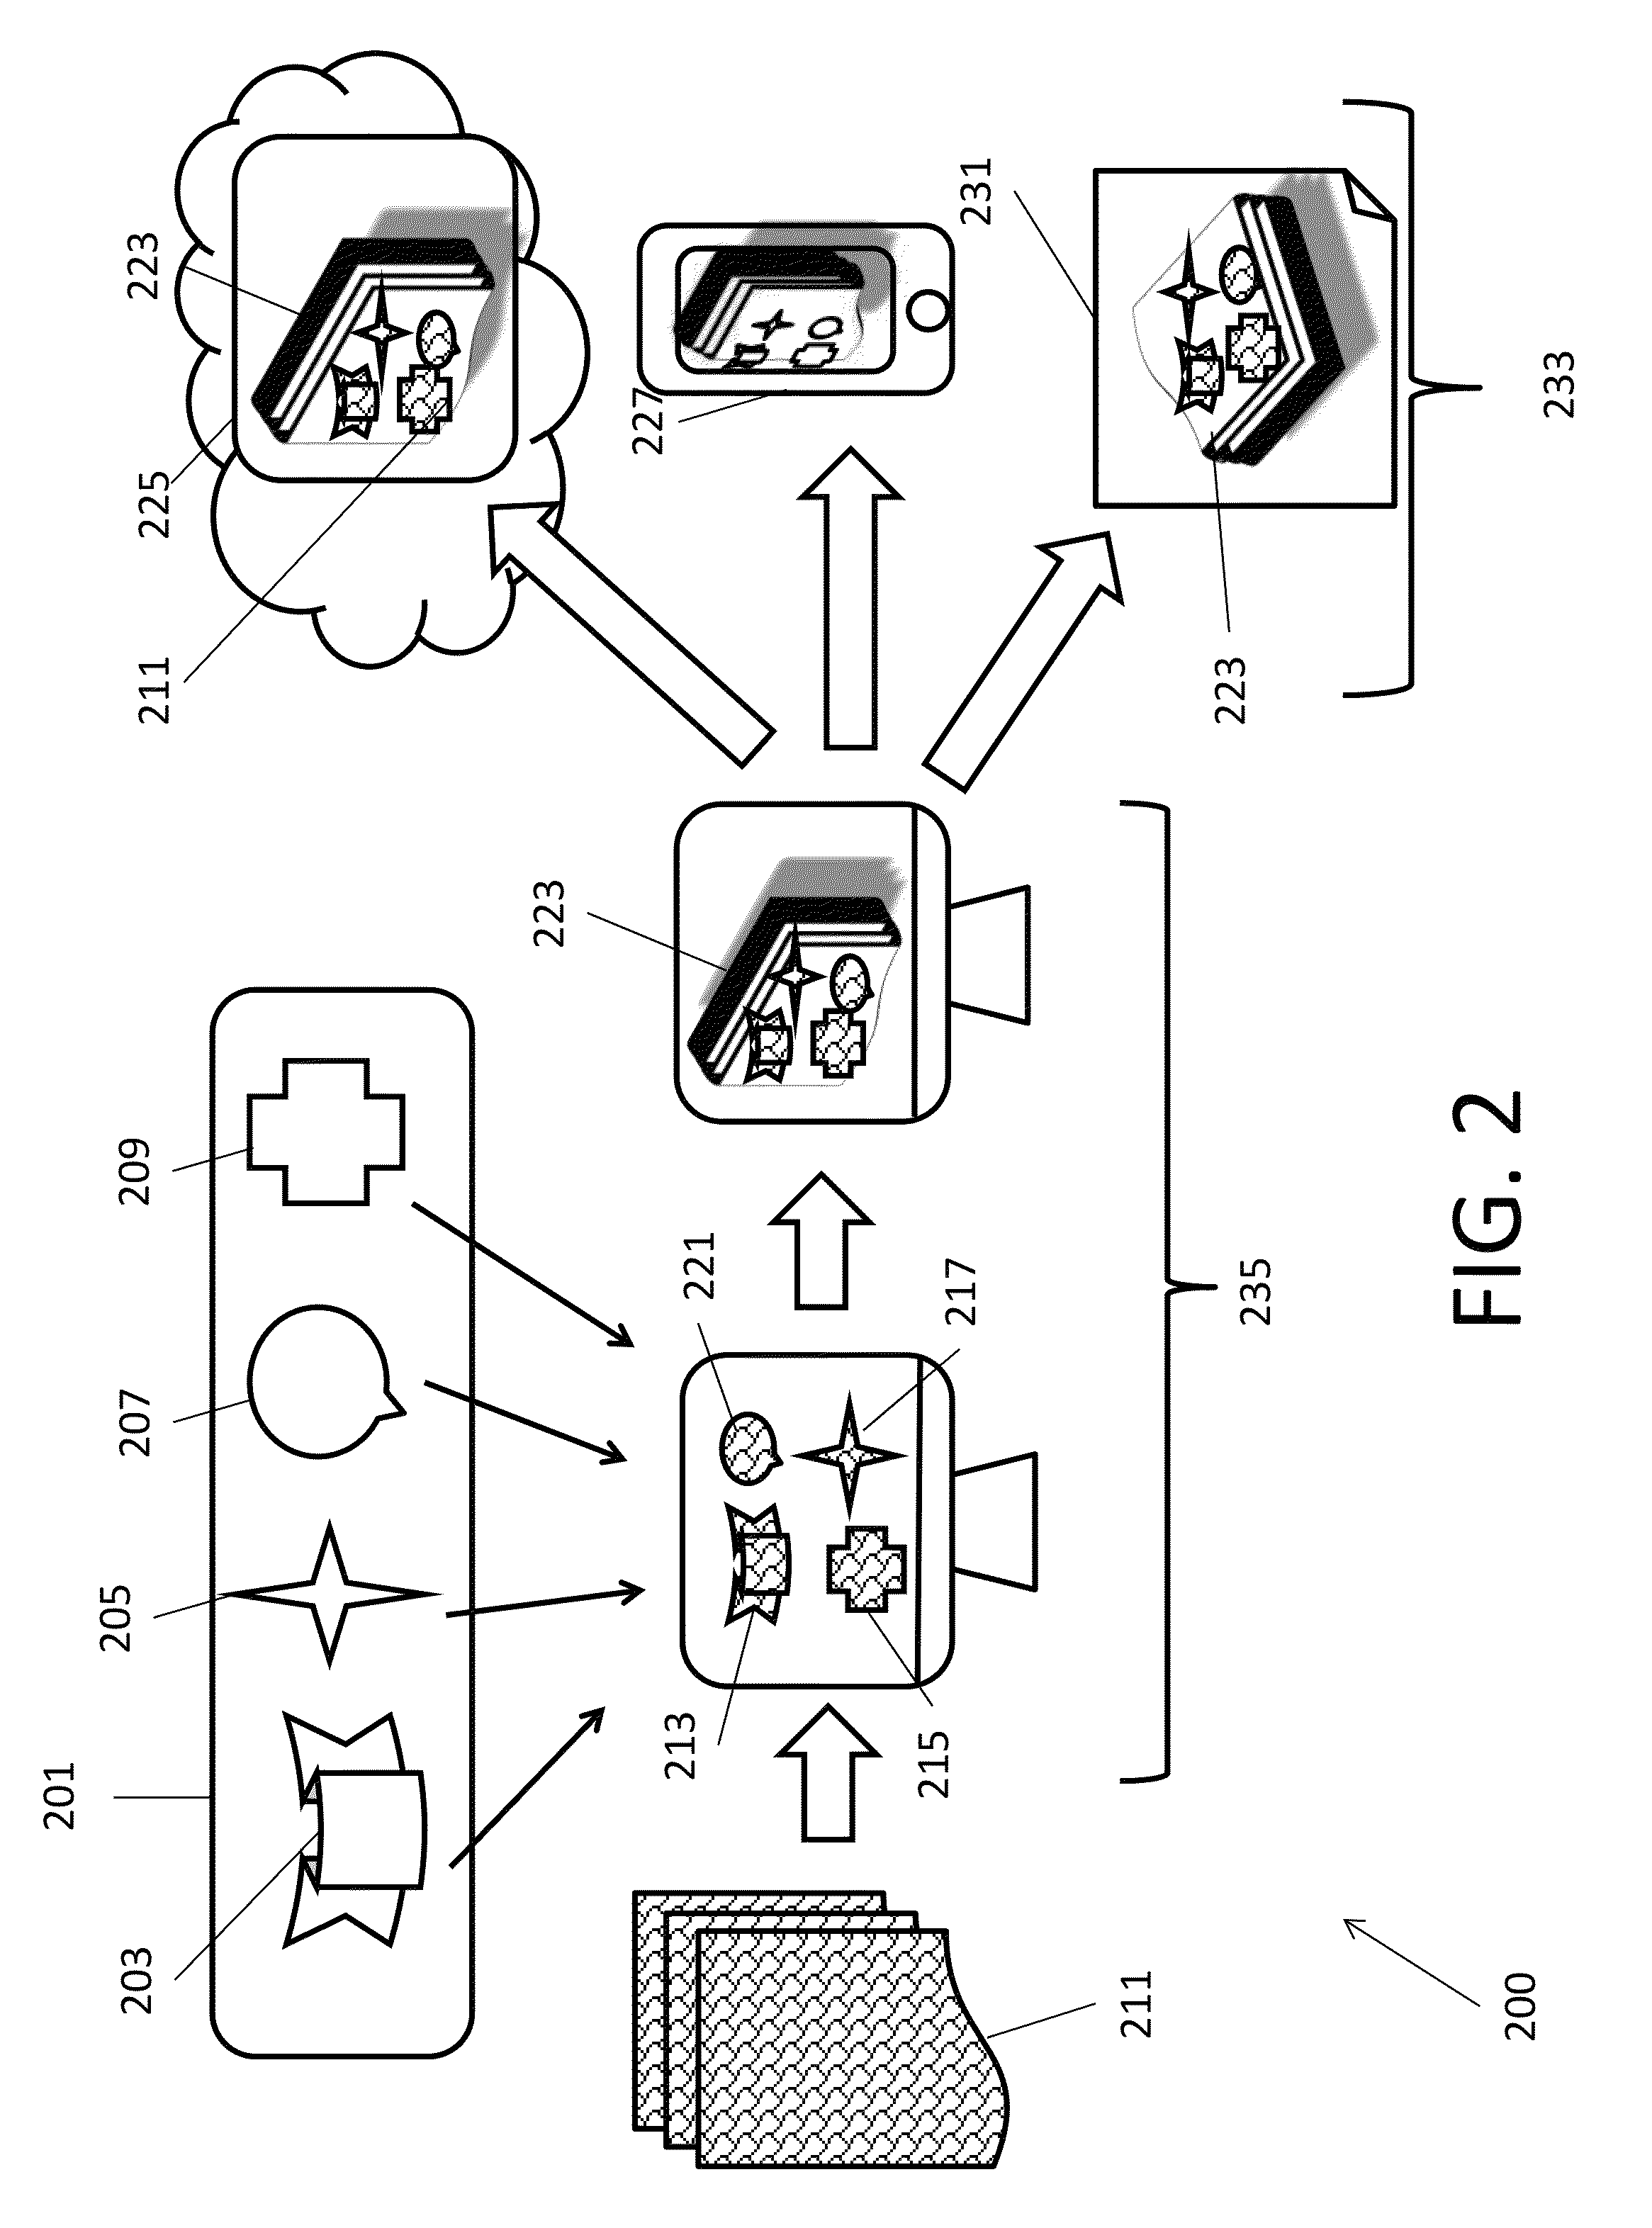 System and method of providing and distributing three dimensional video productions from digitally recorded personal event files